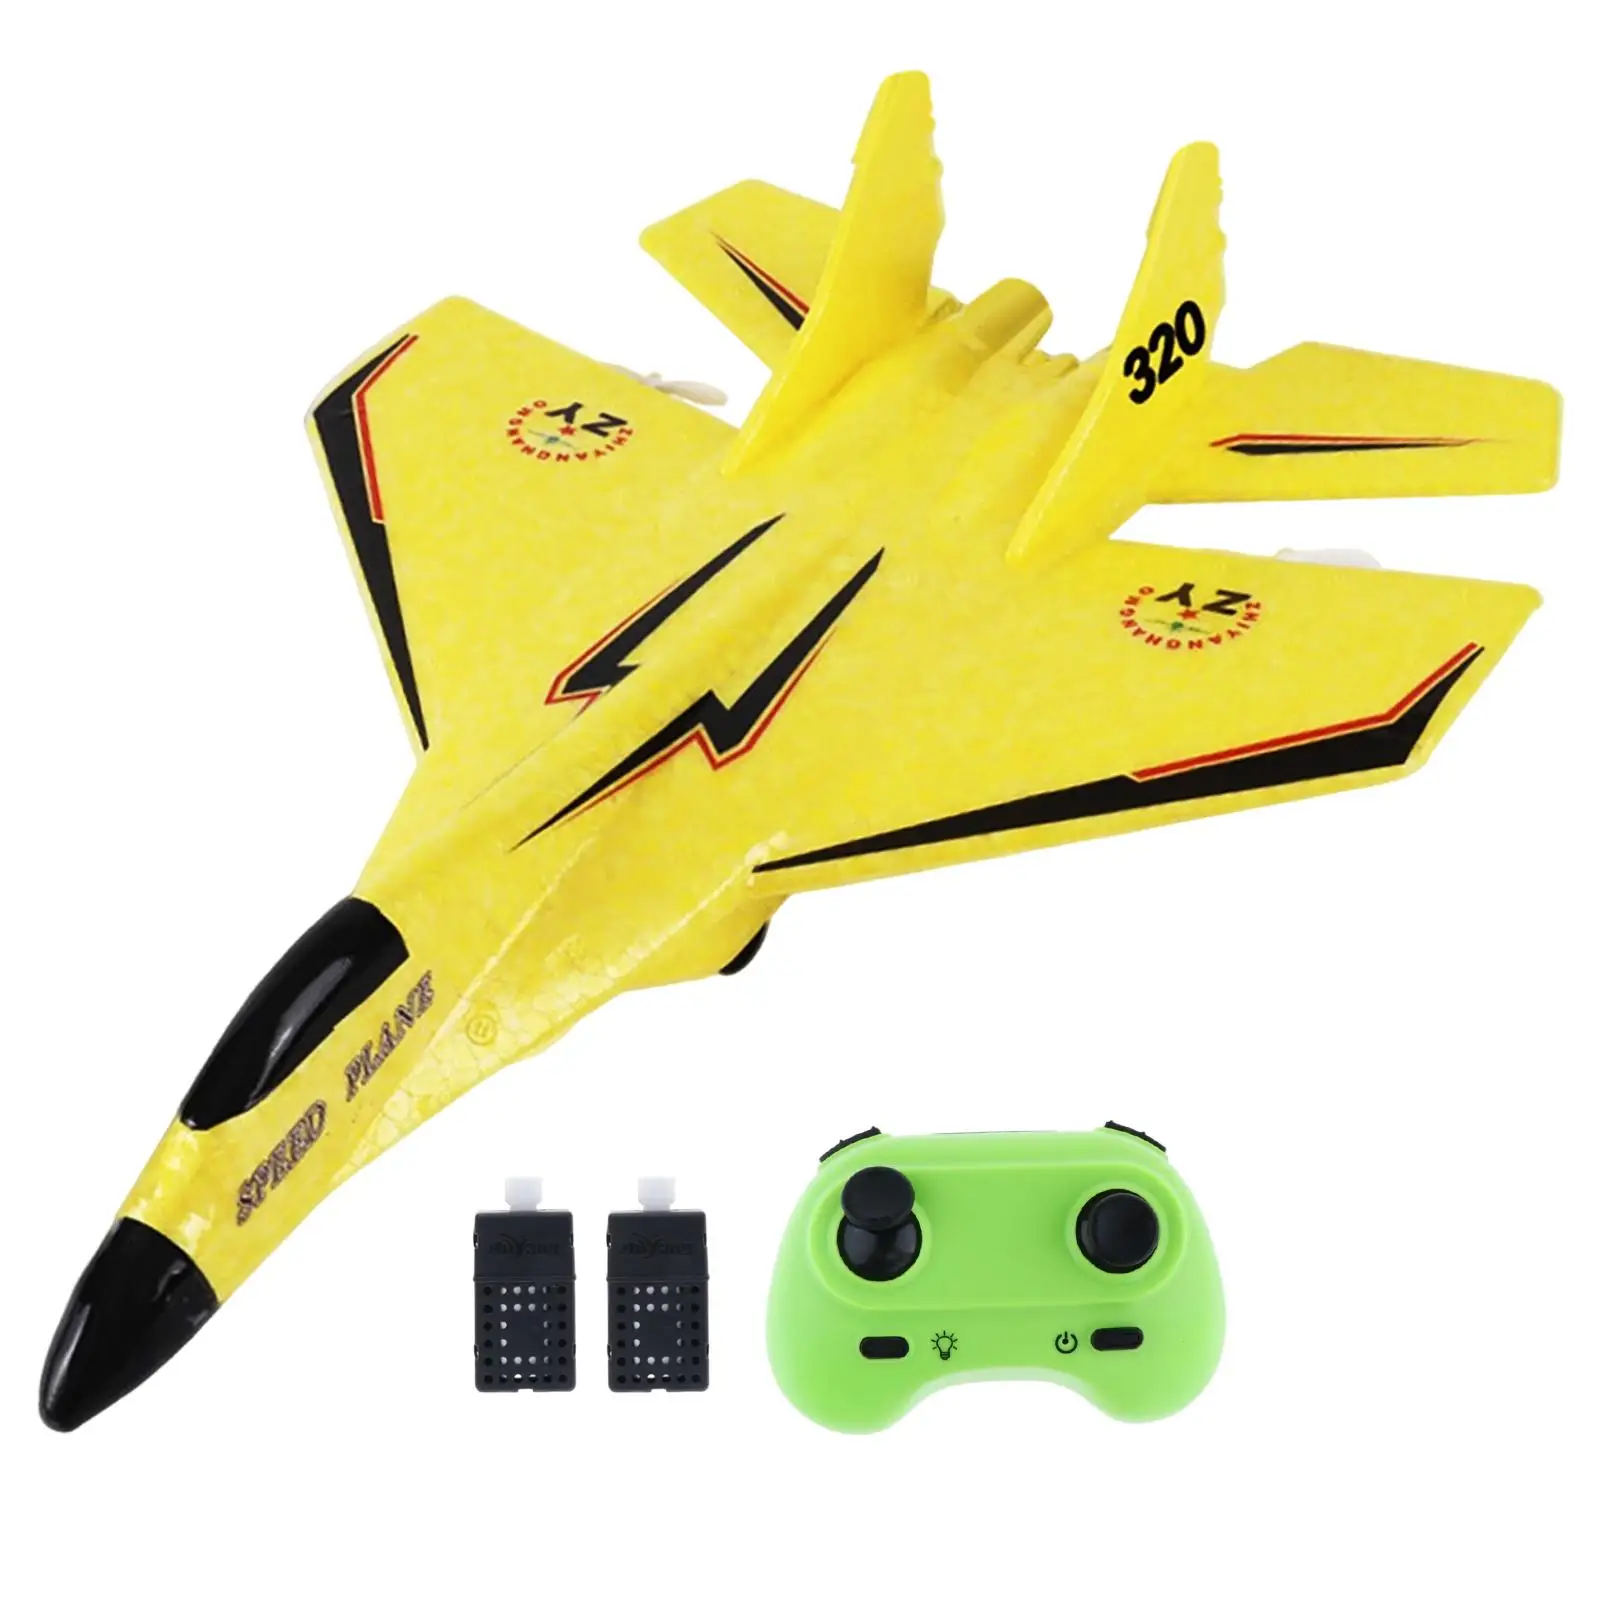 

RC Plane Outdoor Flighting Toys Remote Control Airplane Jet Fighter Toys Hobby RC Glider for Boys Girls Beginner Kids Adults